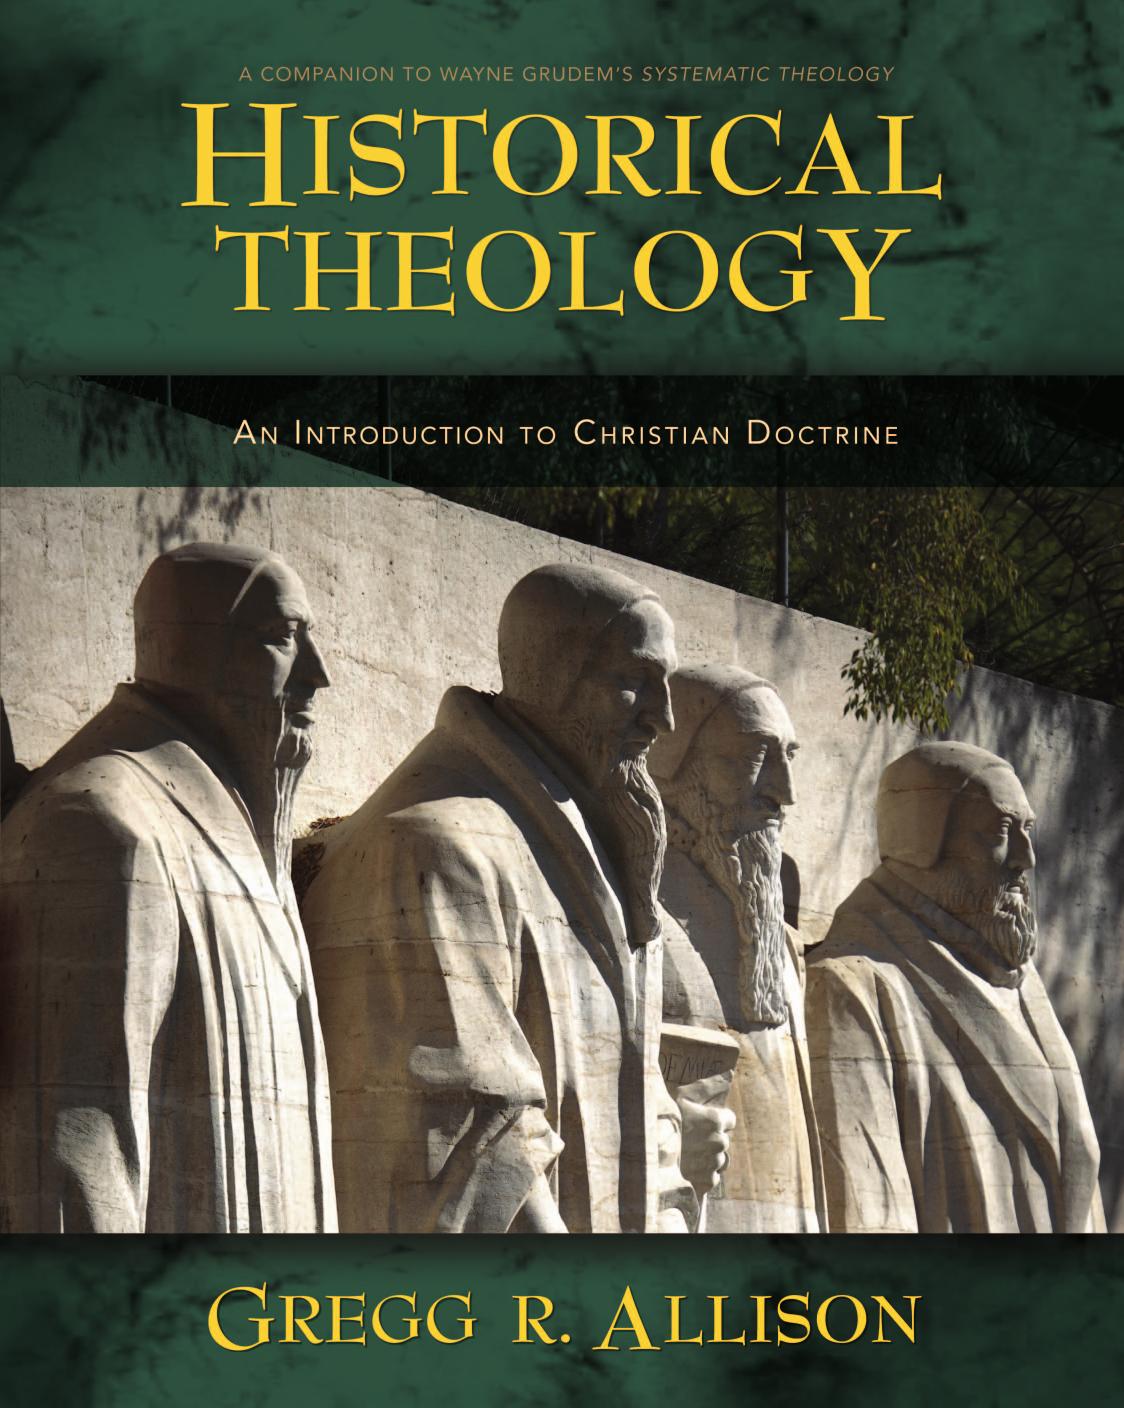 Historical theology an introduction to Christian doctrine a companion to Wayne Grudem's Systematic theology 2011